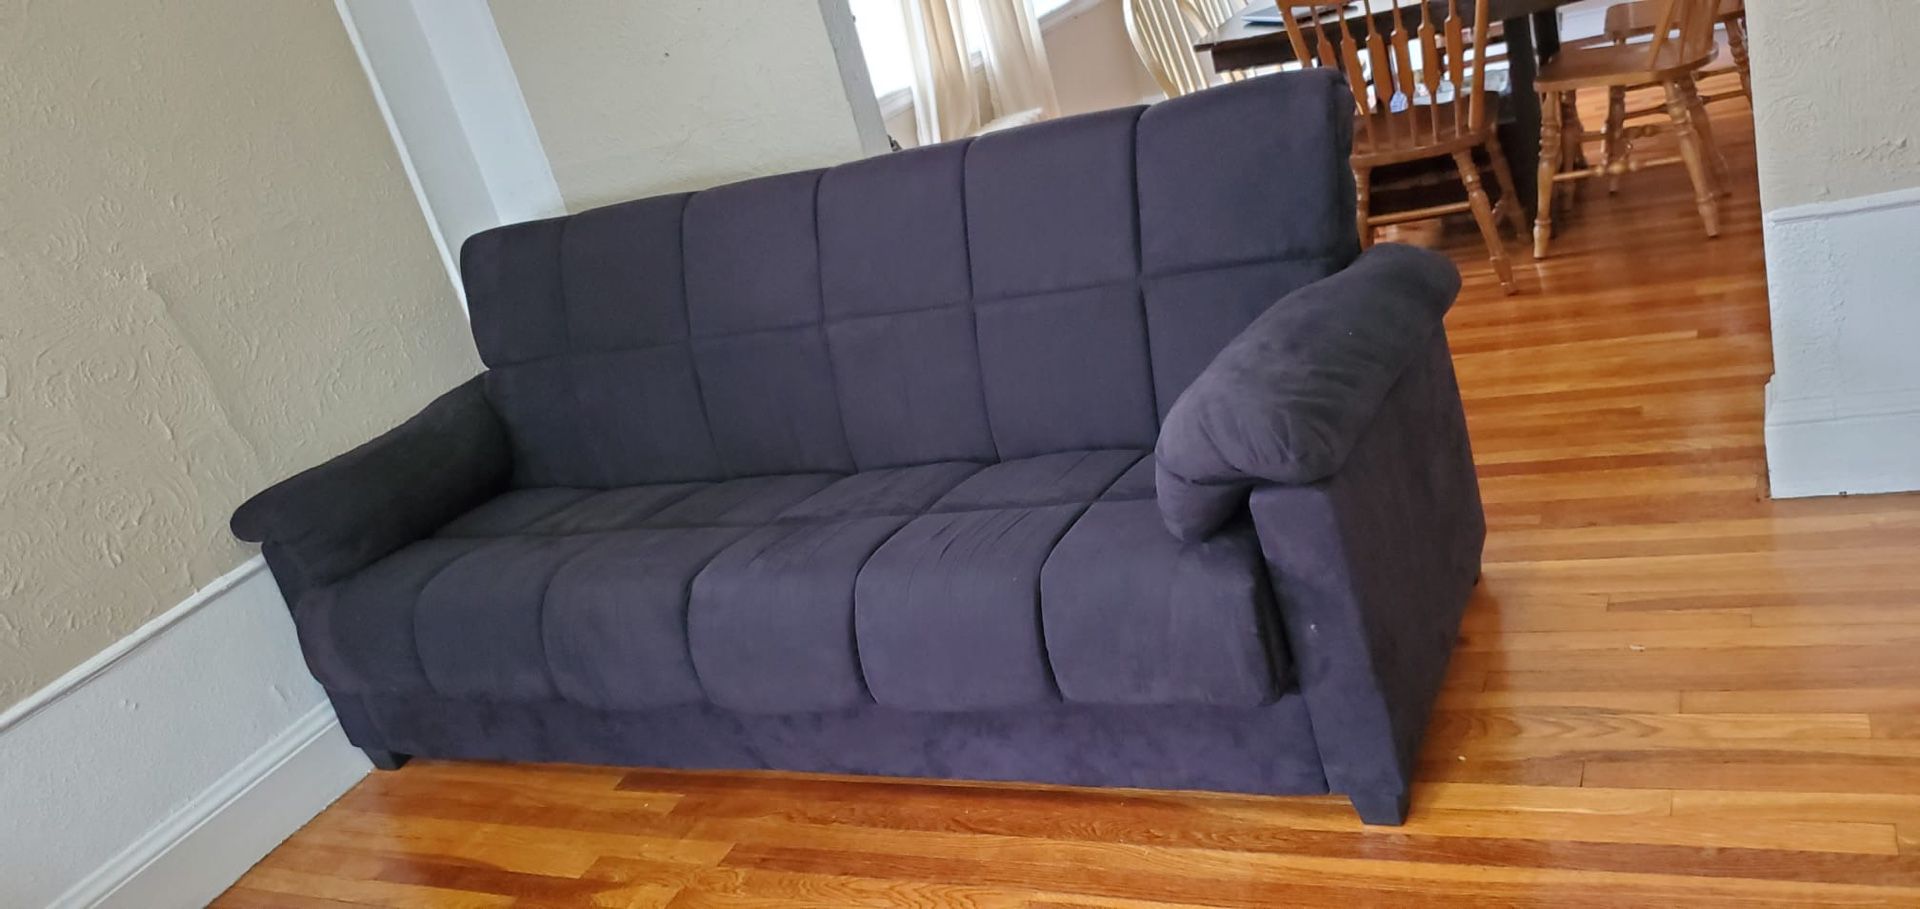 Black bed sofa/ couch